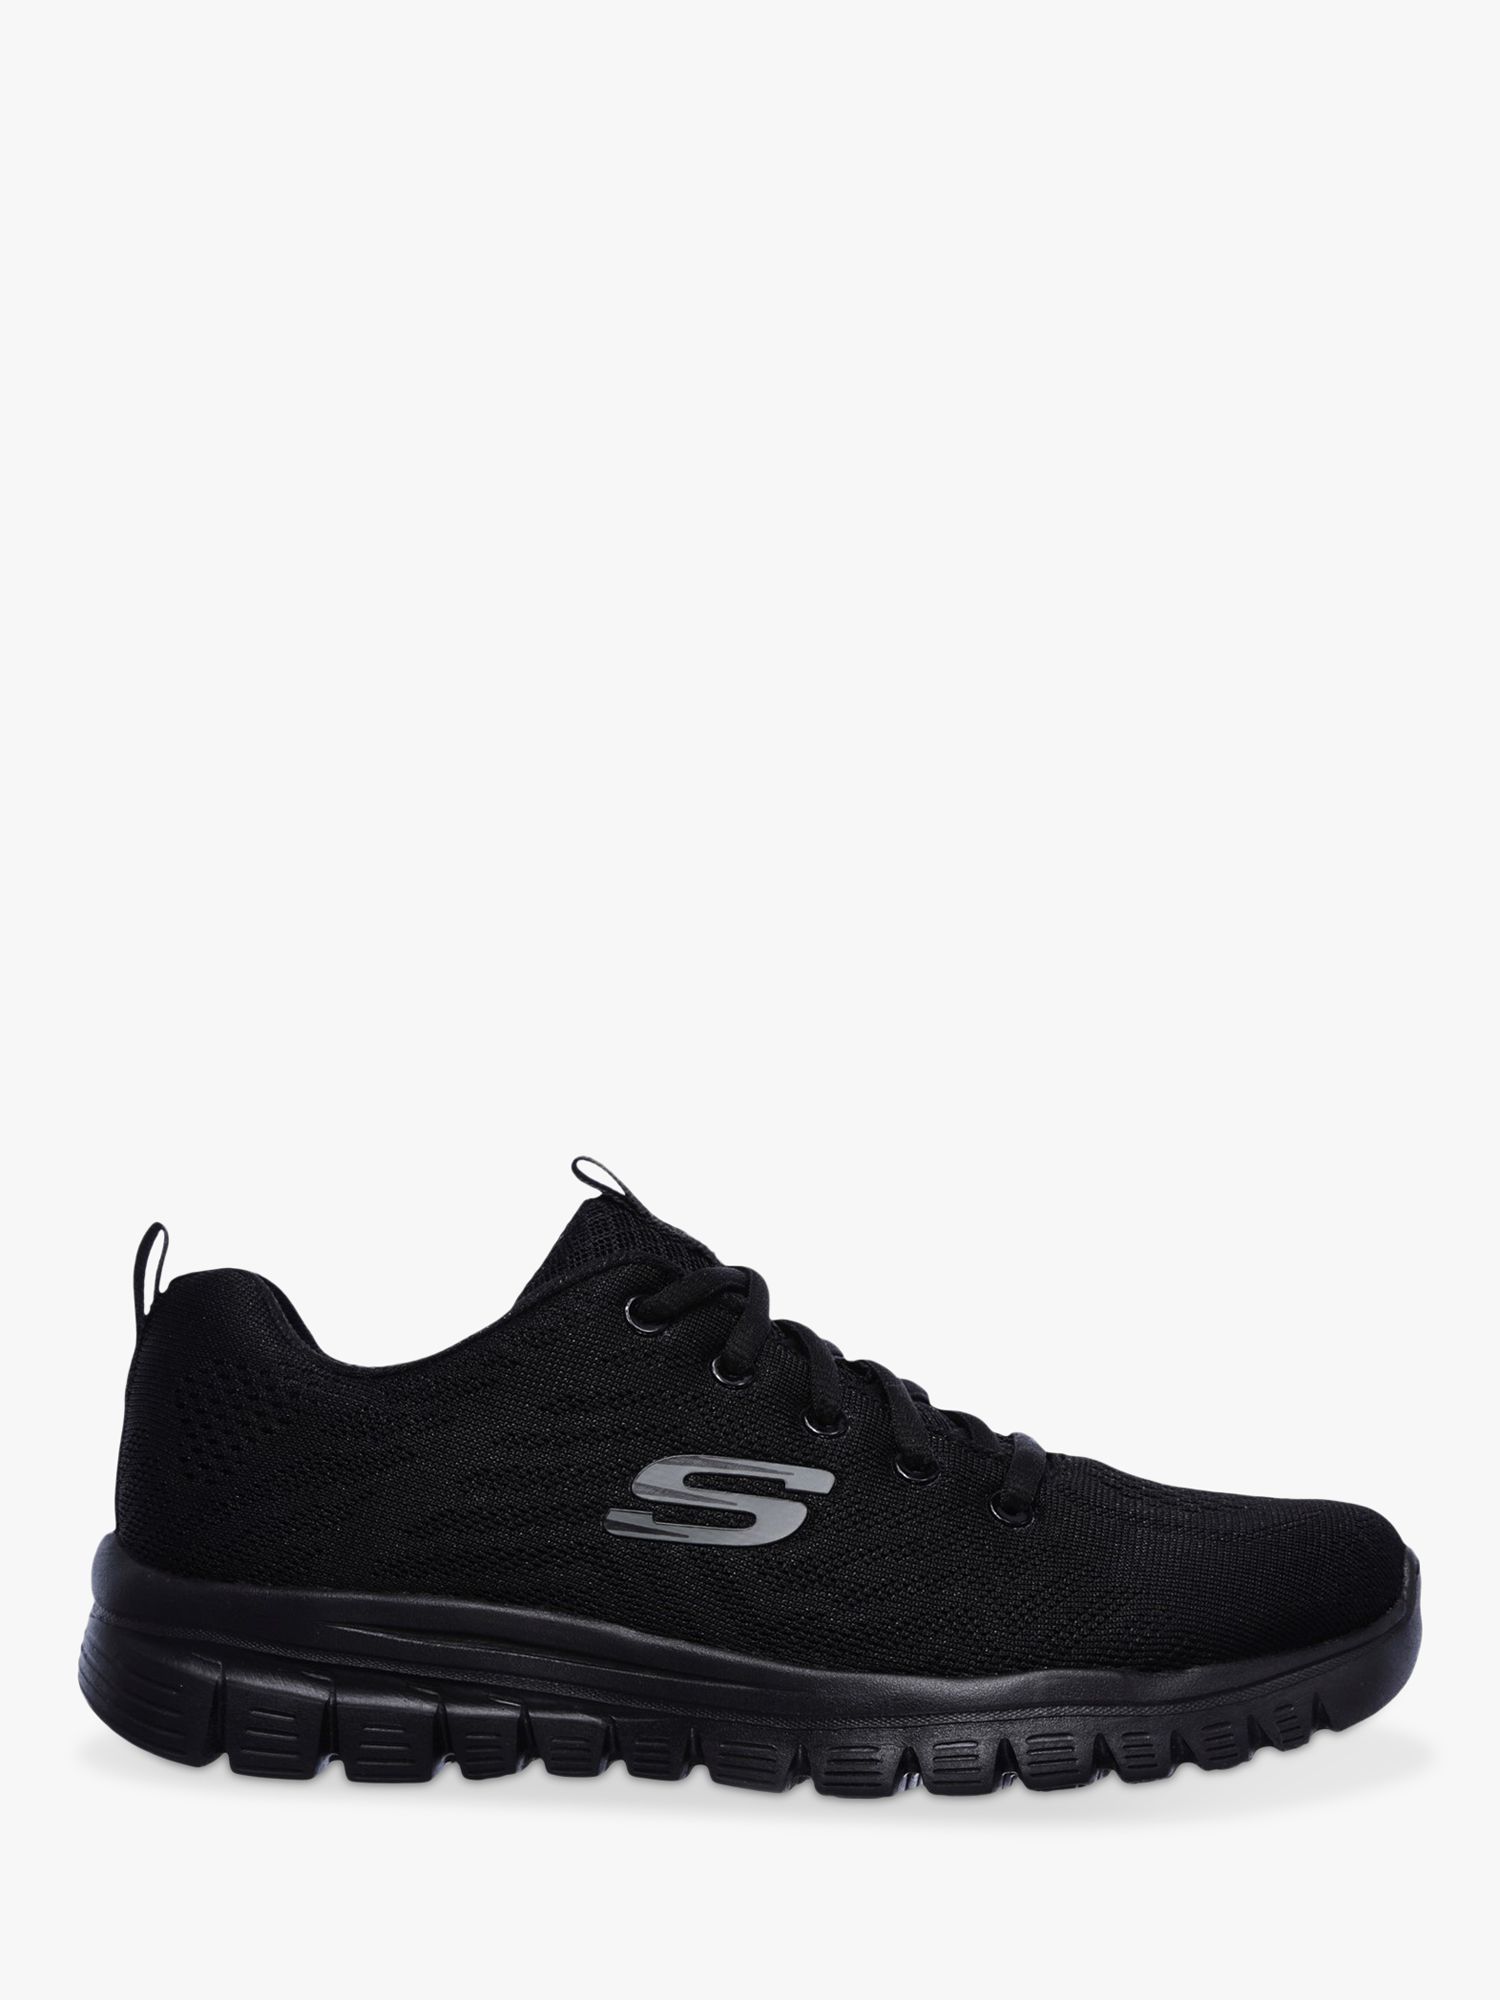 Skechers Get Connected Sports Trainers, 3